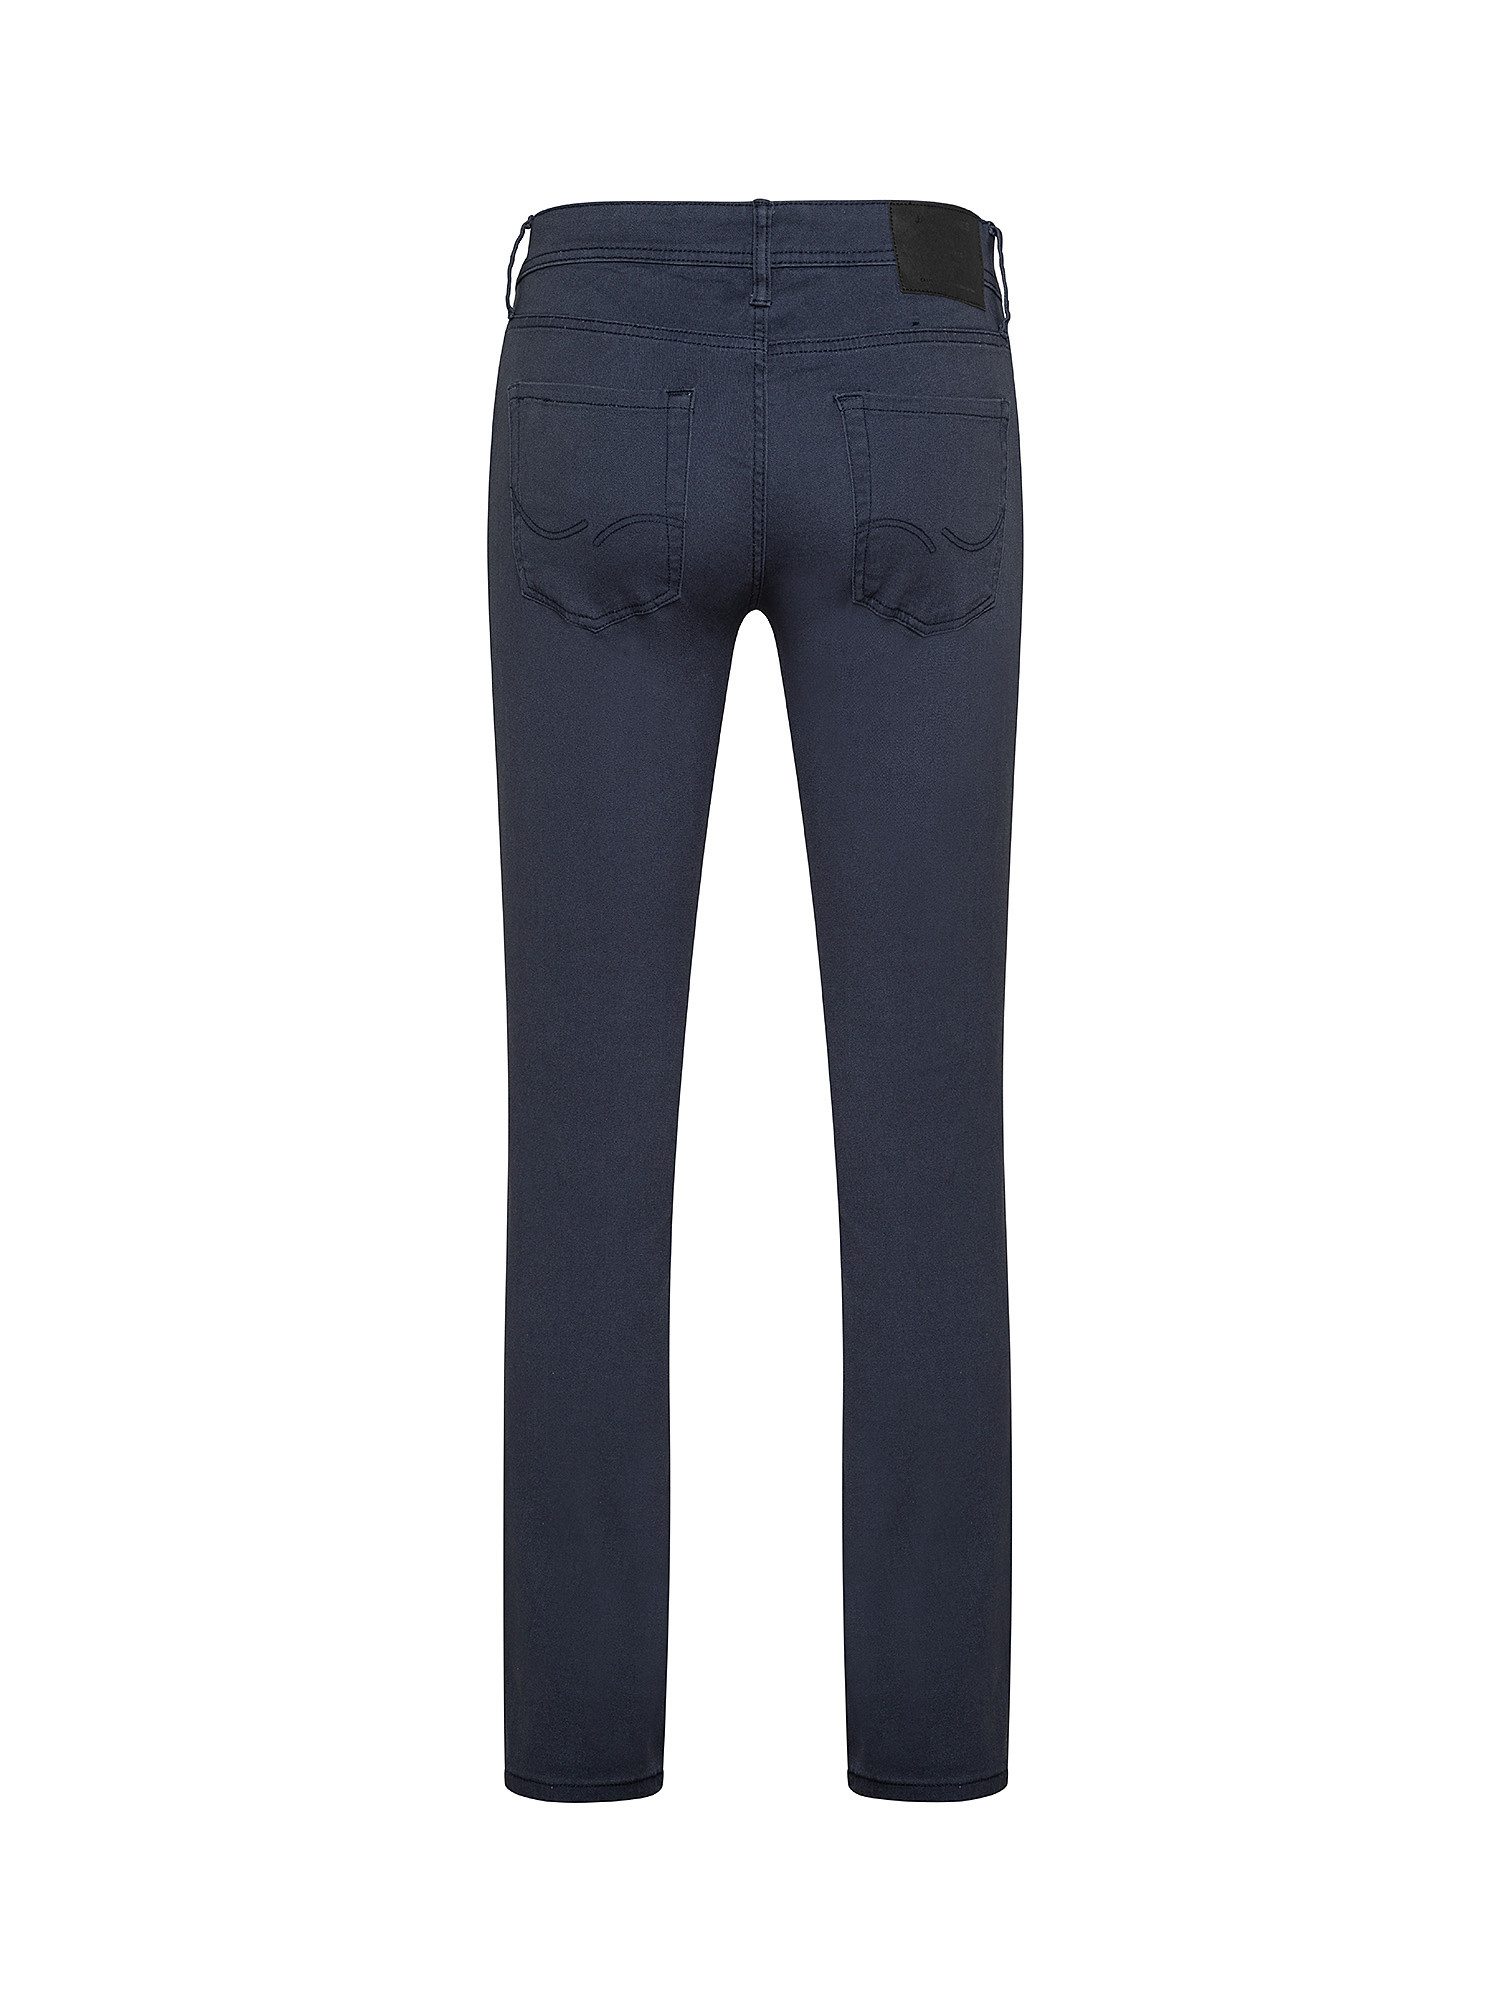 Trousers, Dark Blue, large image number 1